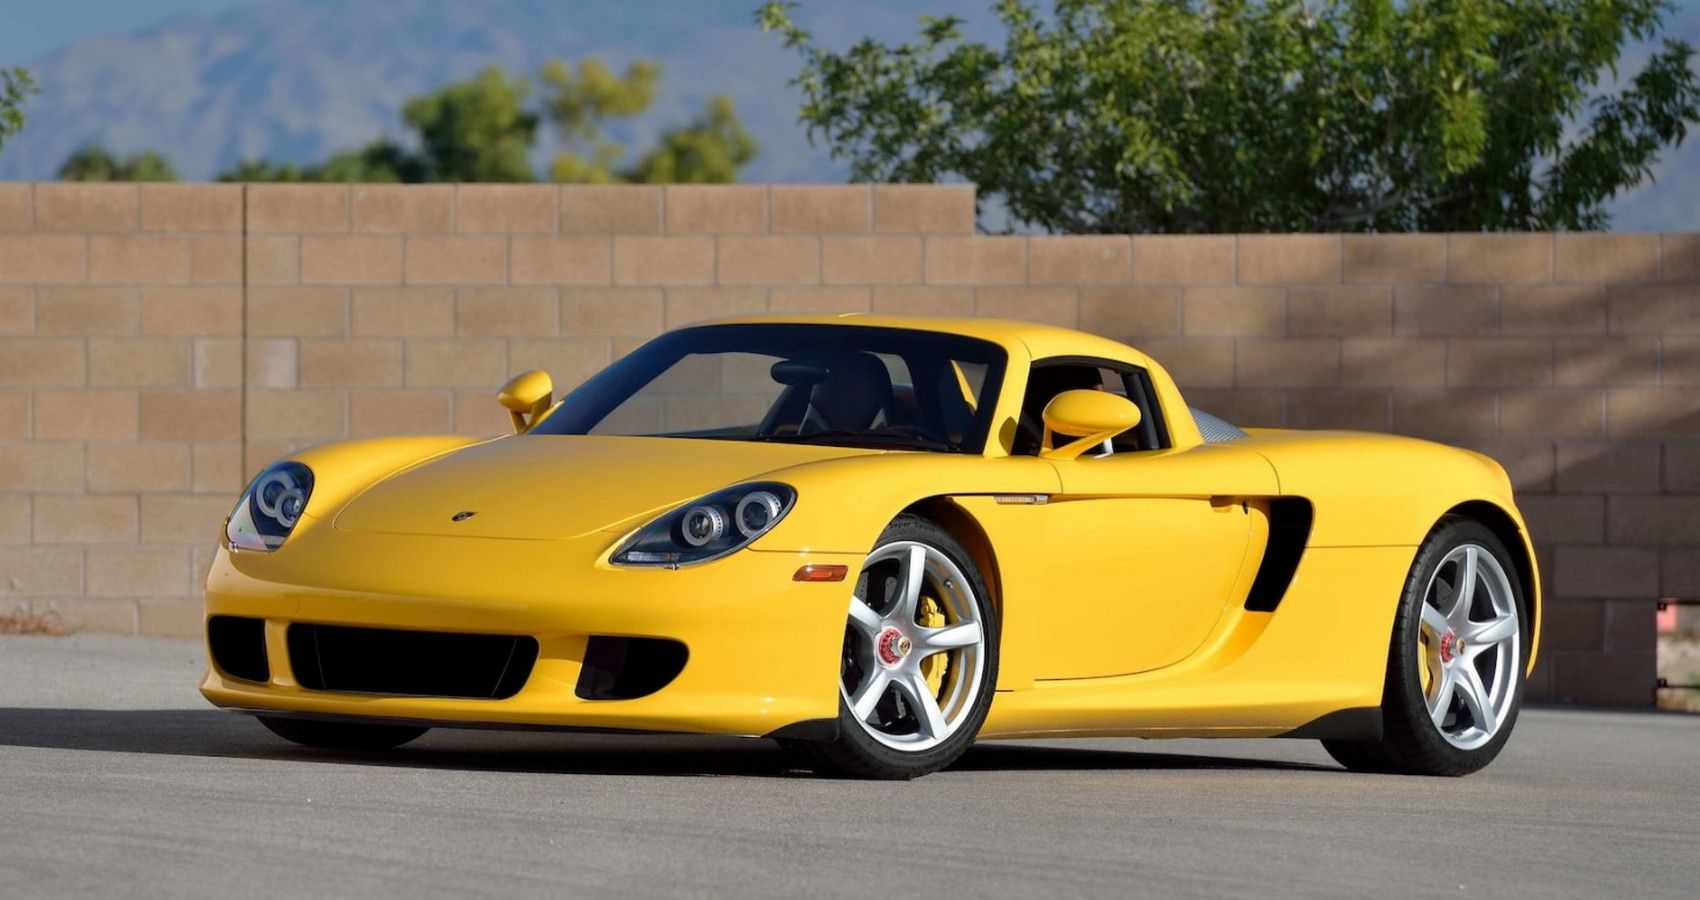 10 Reasons Why The Porsche Carrera GT Is One Of The Sickest Supercars Ever  Made